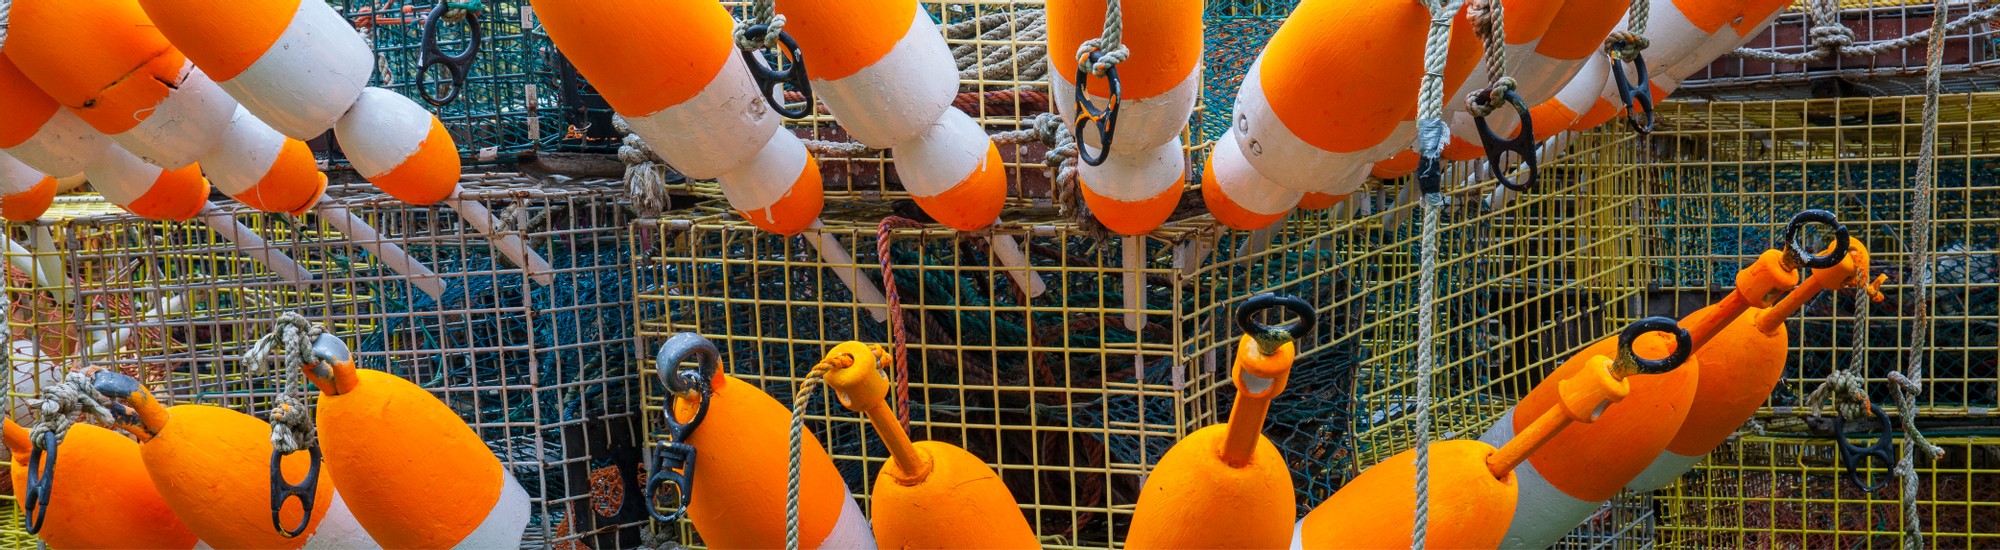 Lobster buoys and lobster traps